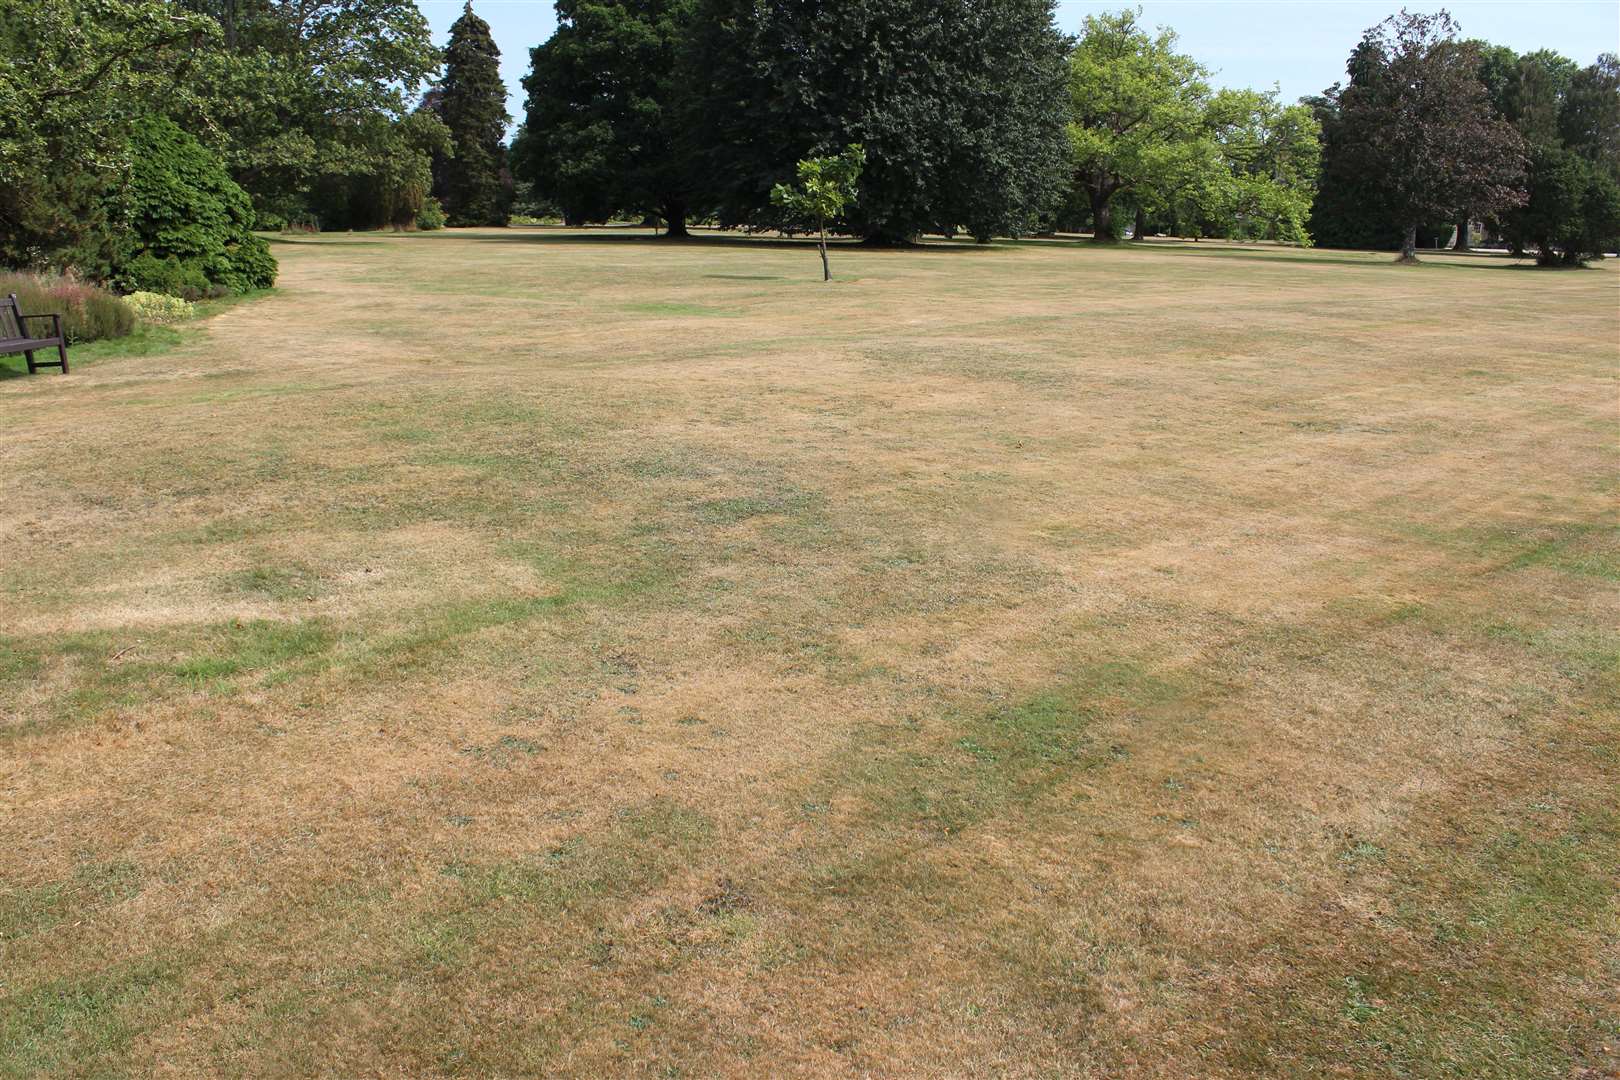 Many areas in England currently look dry and parched with lack of a rainfall